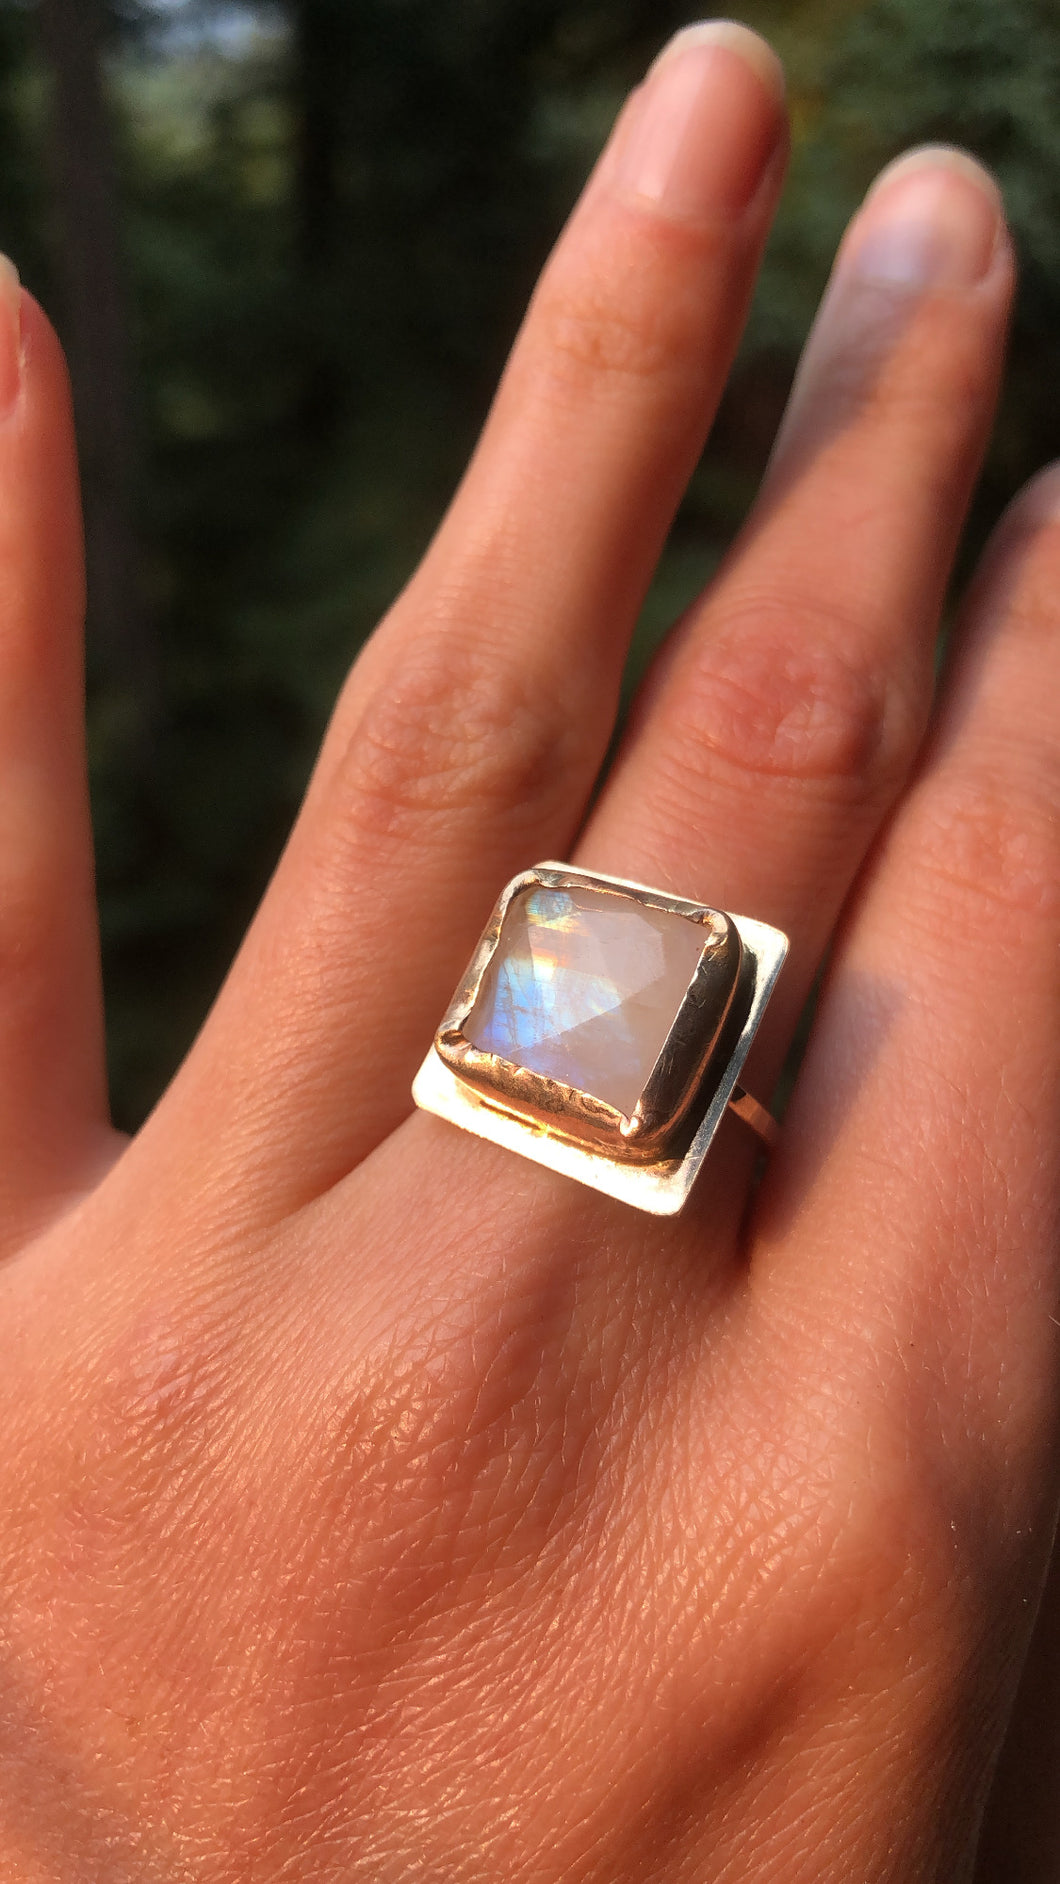 The Moonstone Ring